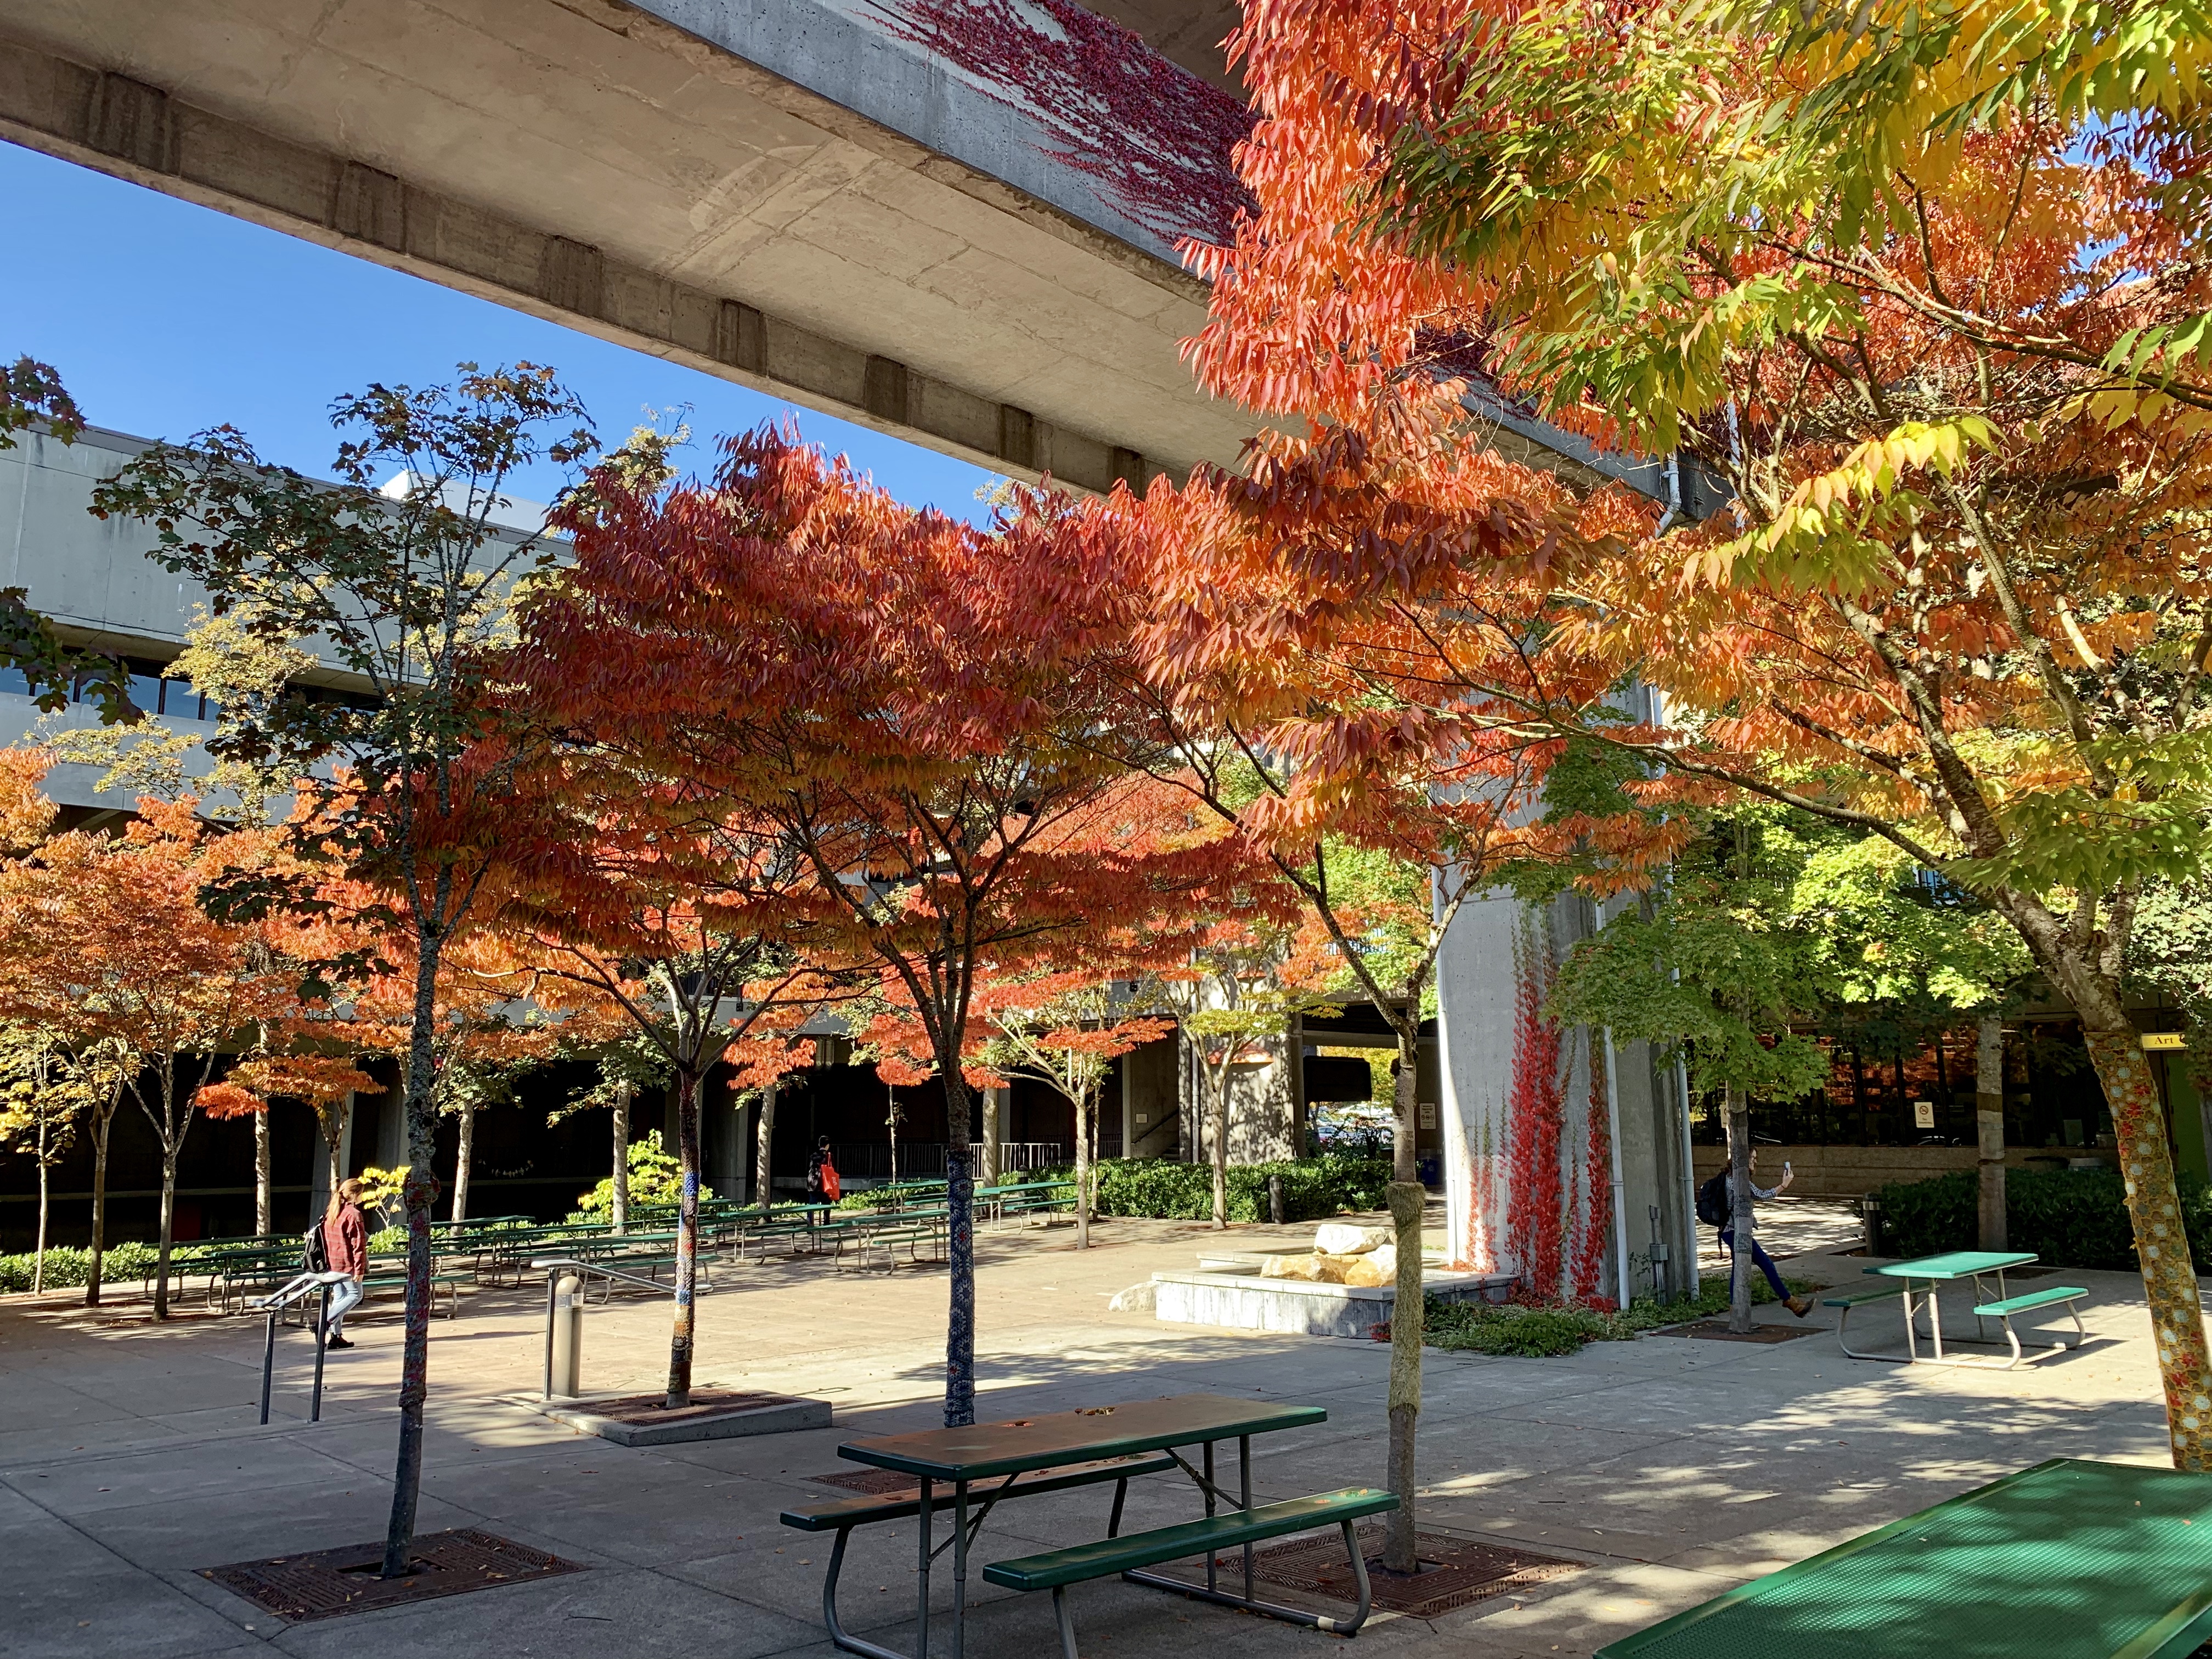 North Seattle College Courtyard with fall leaves on trees